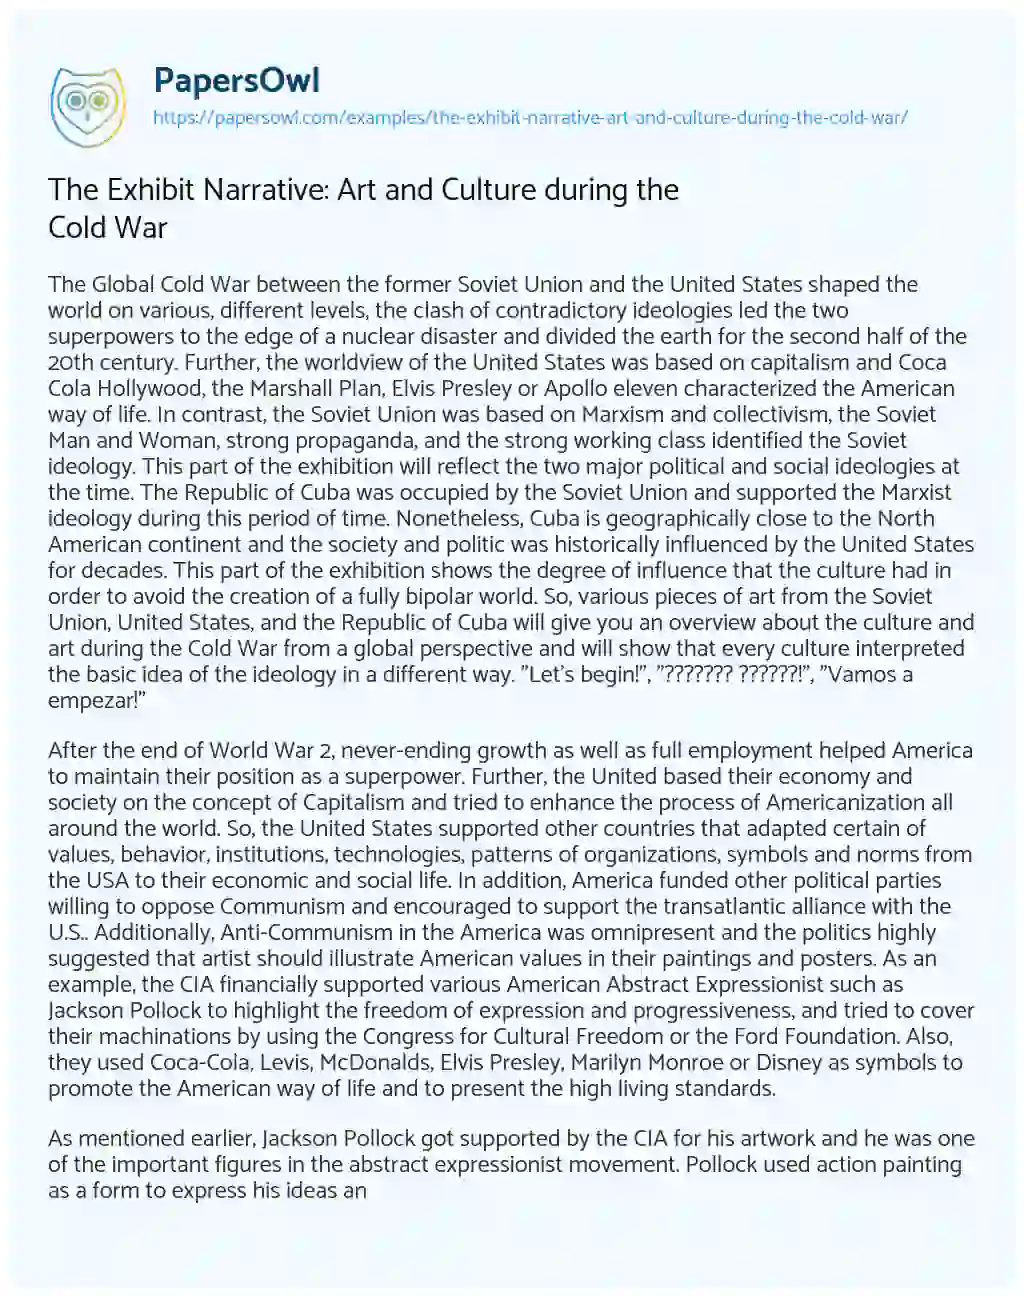 The Exhibit Narrative: Art and Culture during the Cold War essay